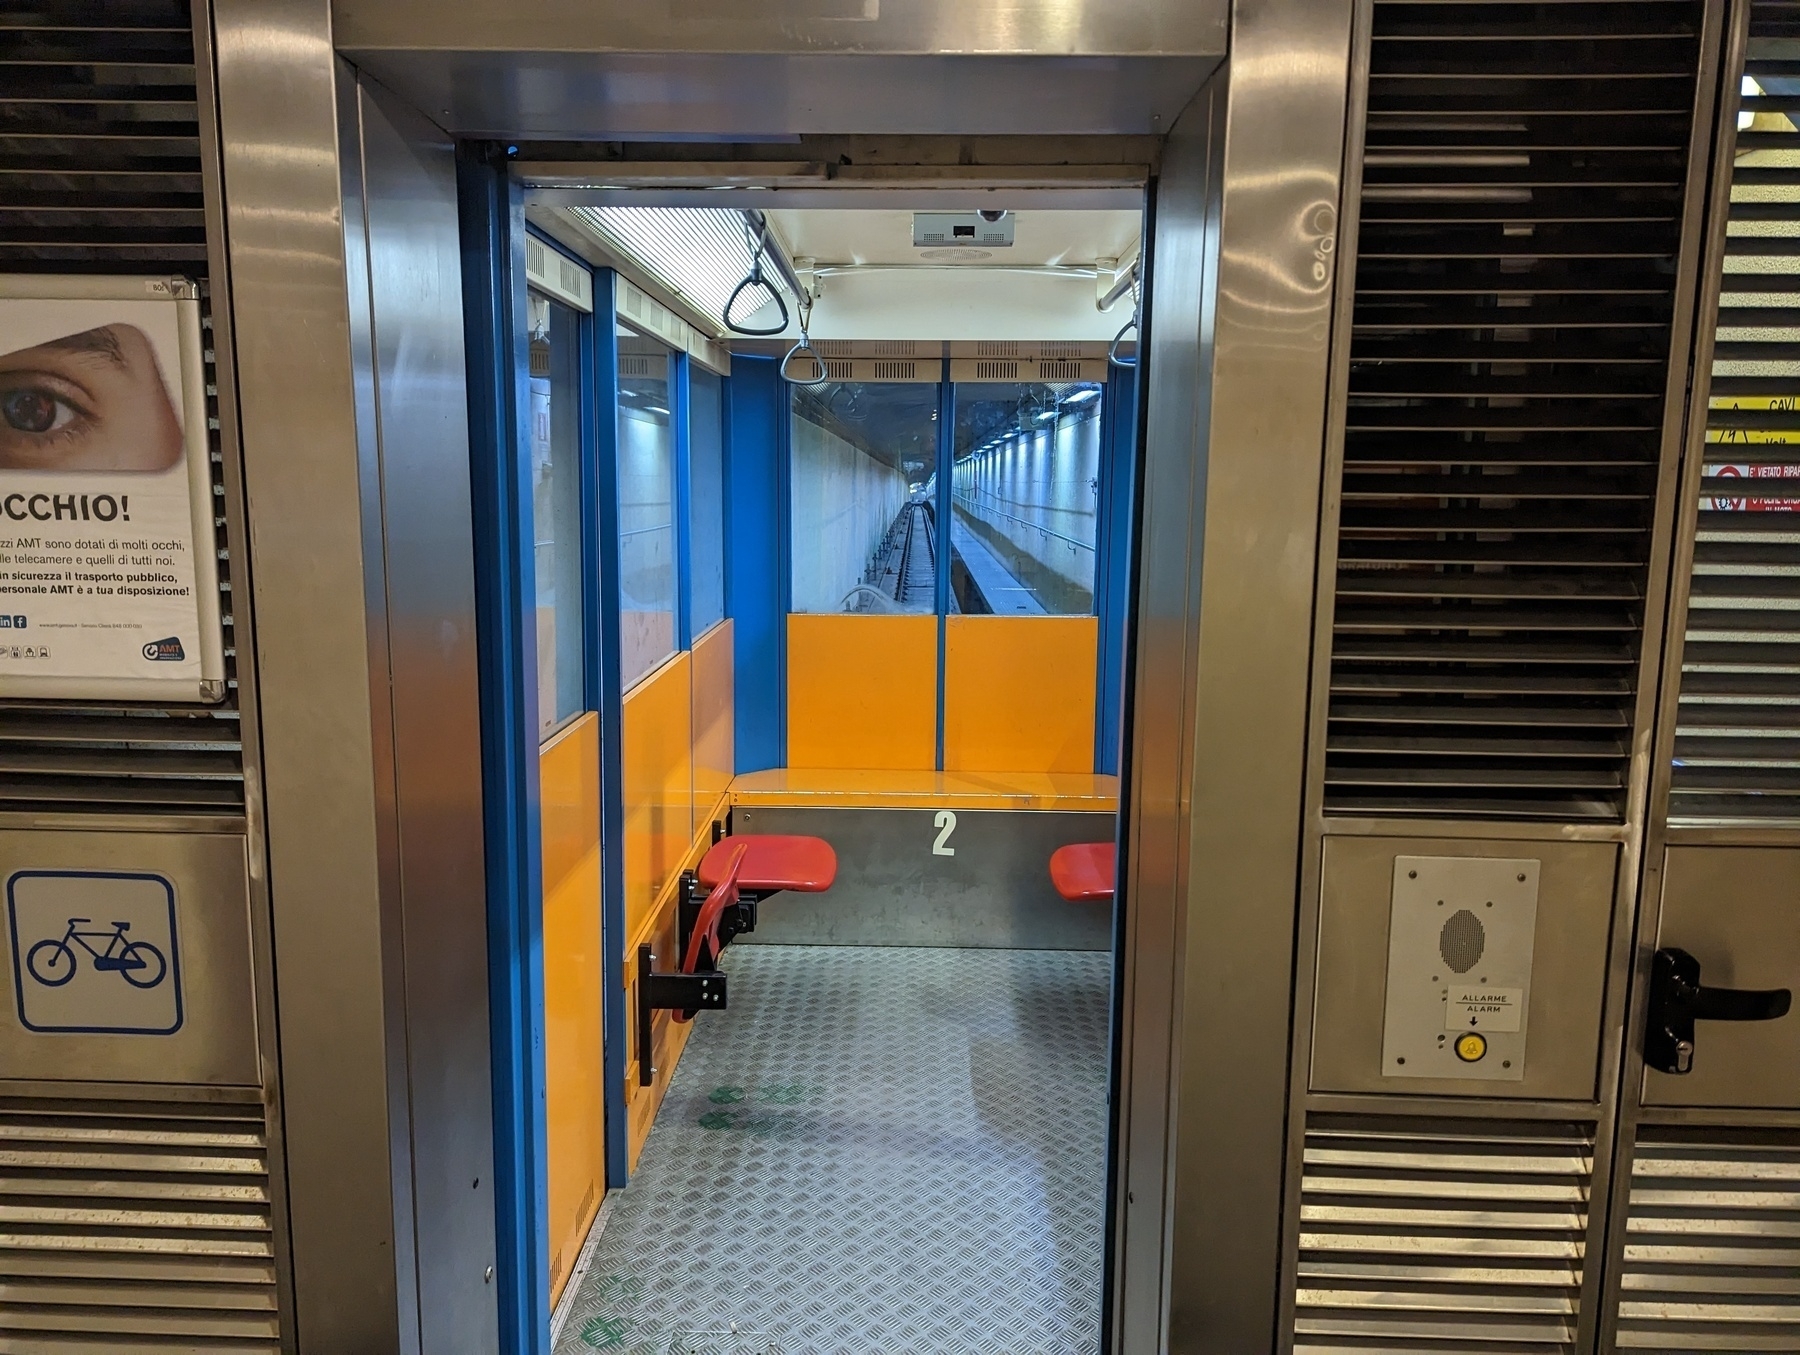 Empty lift car showing red fold-up seats and hand-loops on the ceiling. There are windows on all three sides of the inside of the car showing the corridor.